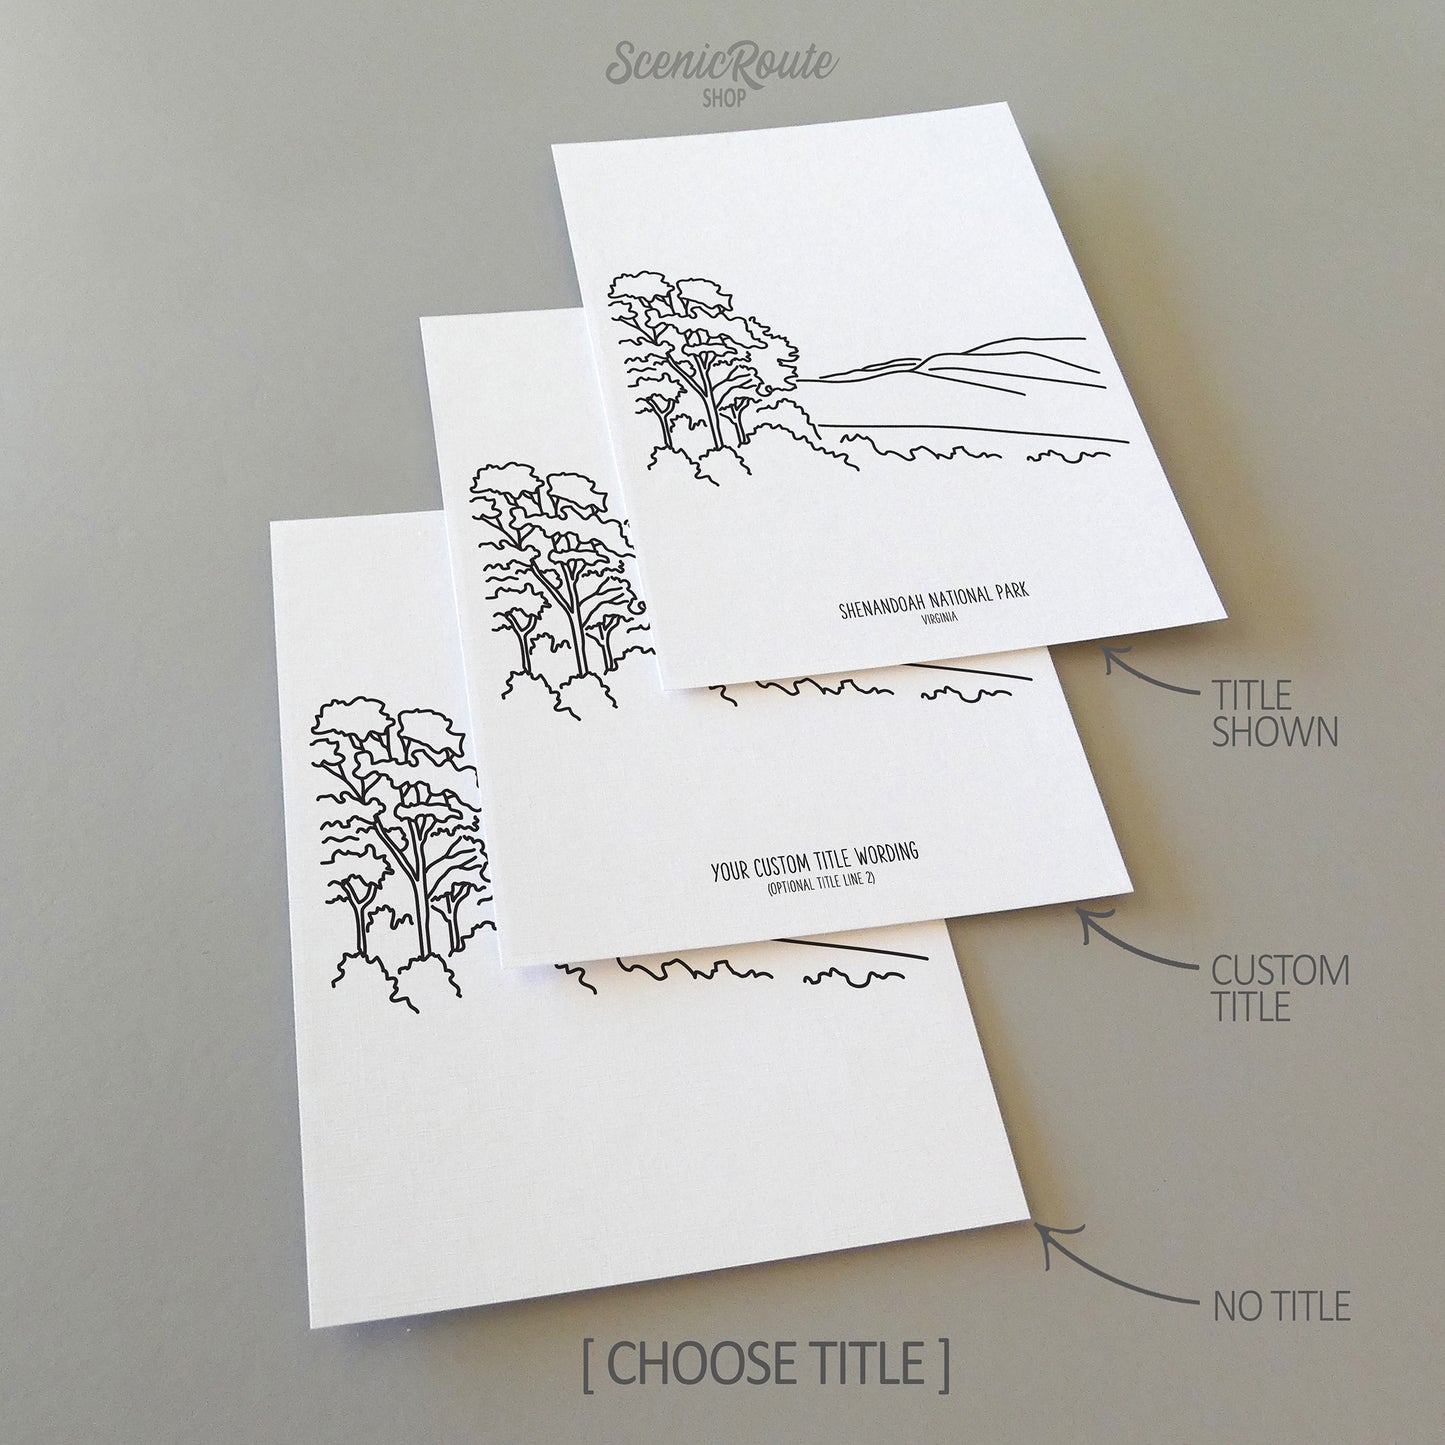 Three line art drawings of Shenandoah National Park on white linen paper with a gray background. The pieces are shown with title options that can be chosen and personalized.